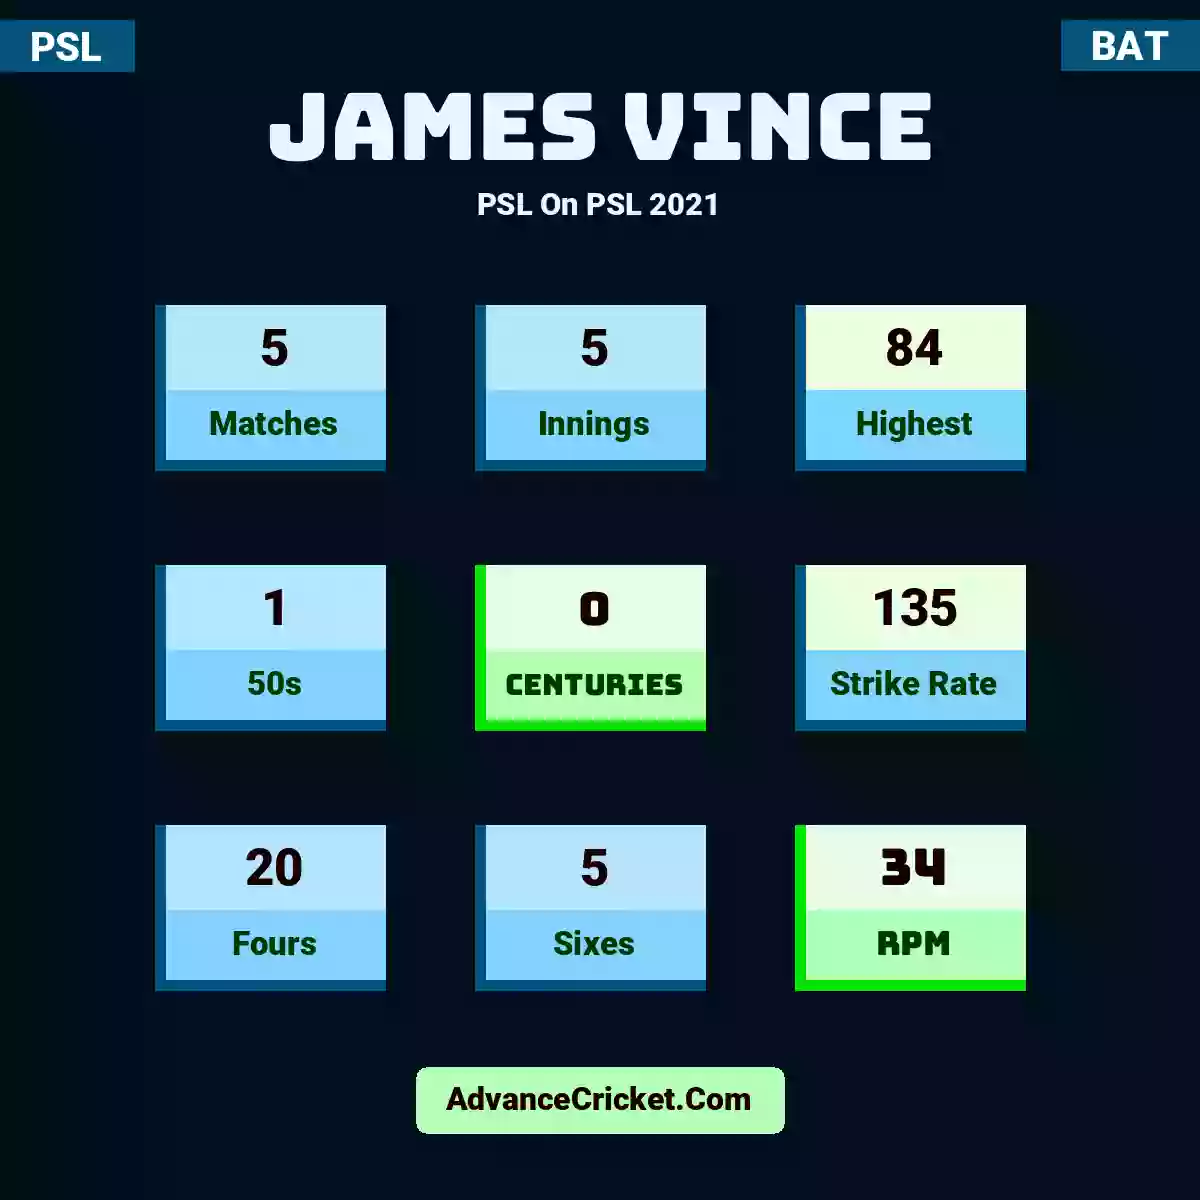 James Vince PSL  On PSL 2021, James Vince played 5 matches, scored 84 runs as highest, 1 half-centuries, and 0 centuries, with a strike rate of 135. J.Vince hit 20 fours and 5 sixes, with an RPM of 34.